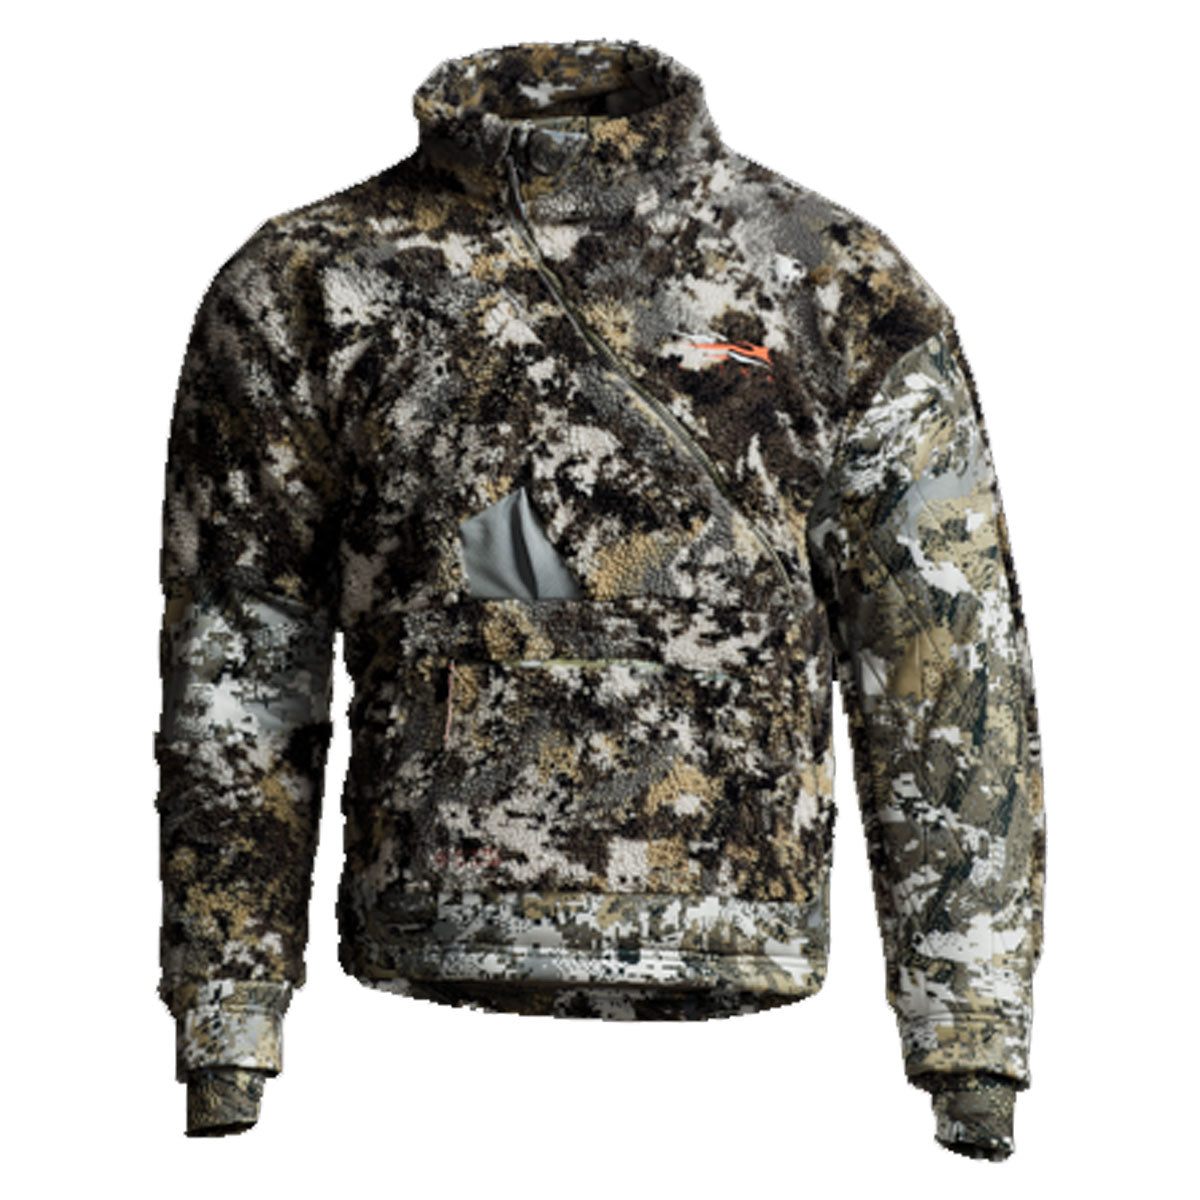 Sitka Fanatic Jacket in  by GOHUNT | Sitka - GOHUNT Shop